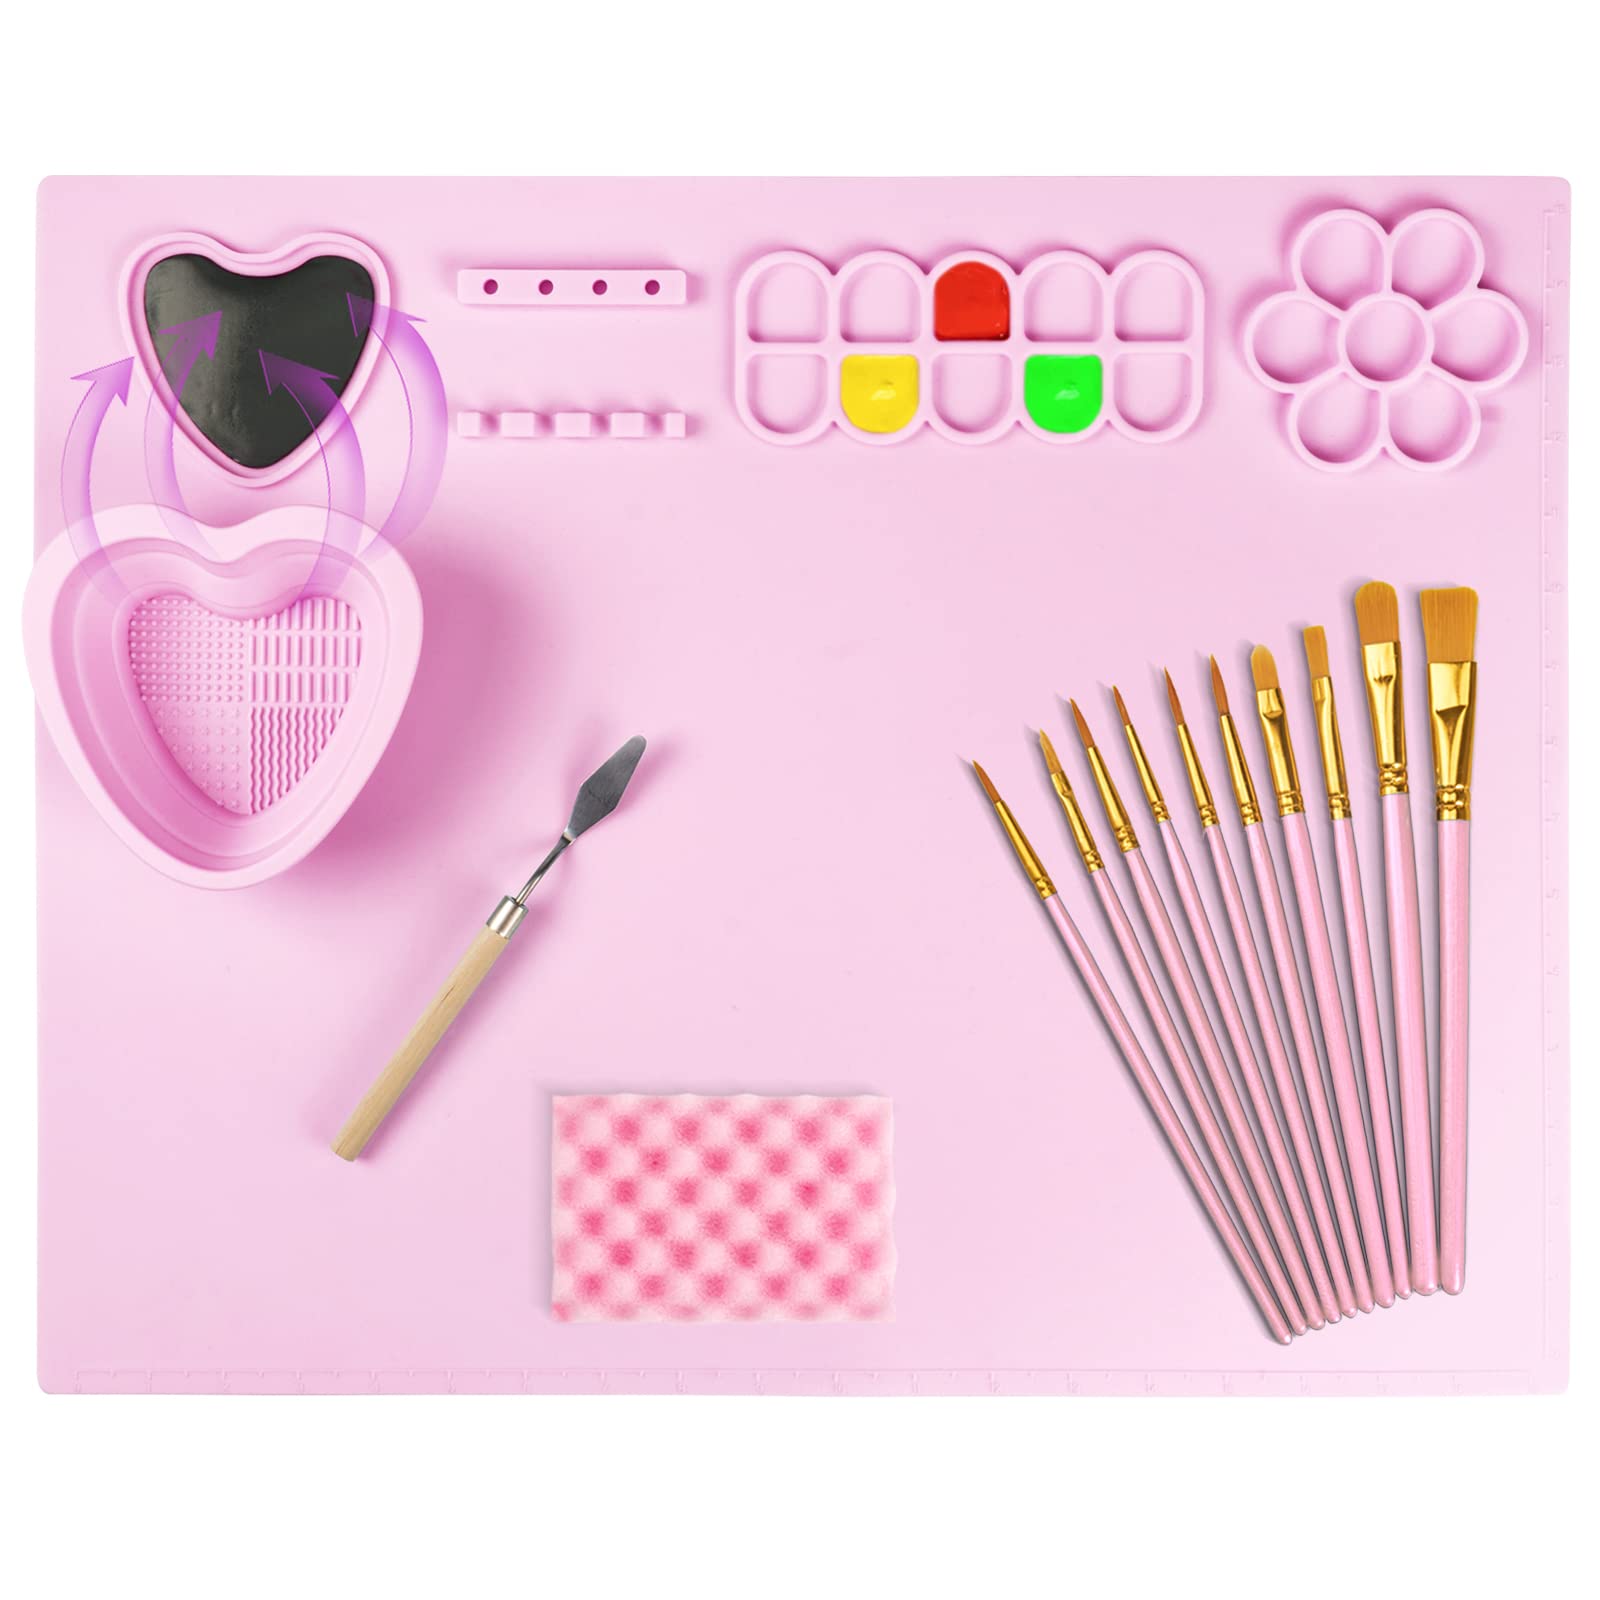 Paint Palette,Thick Silicone Craft Mat with Magnetic Pop-Up Water Cup,2016  inches Large Silicone Mat for Painting,Sculpting,Resin Crafting,Clay and  Play-Doh,Hot Glue Projects,for Adults and Kids Pink